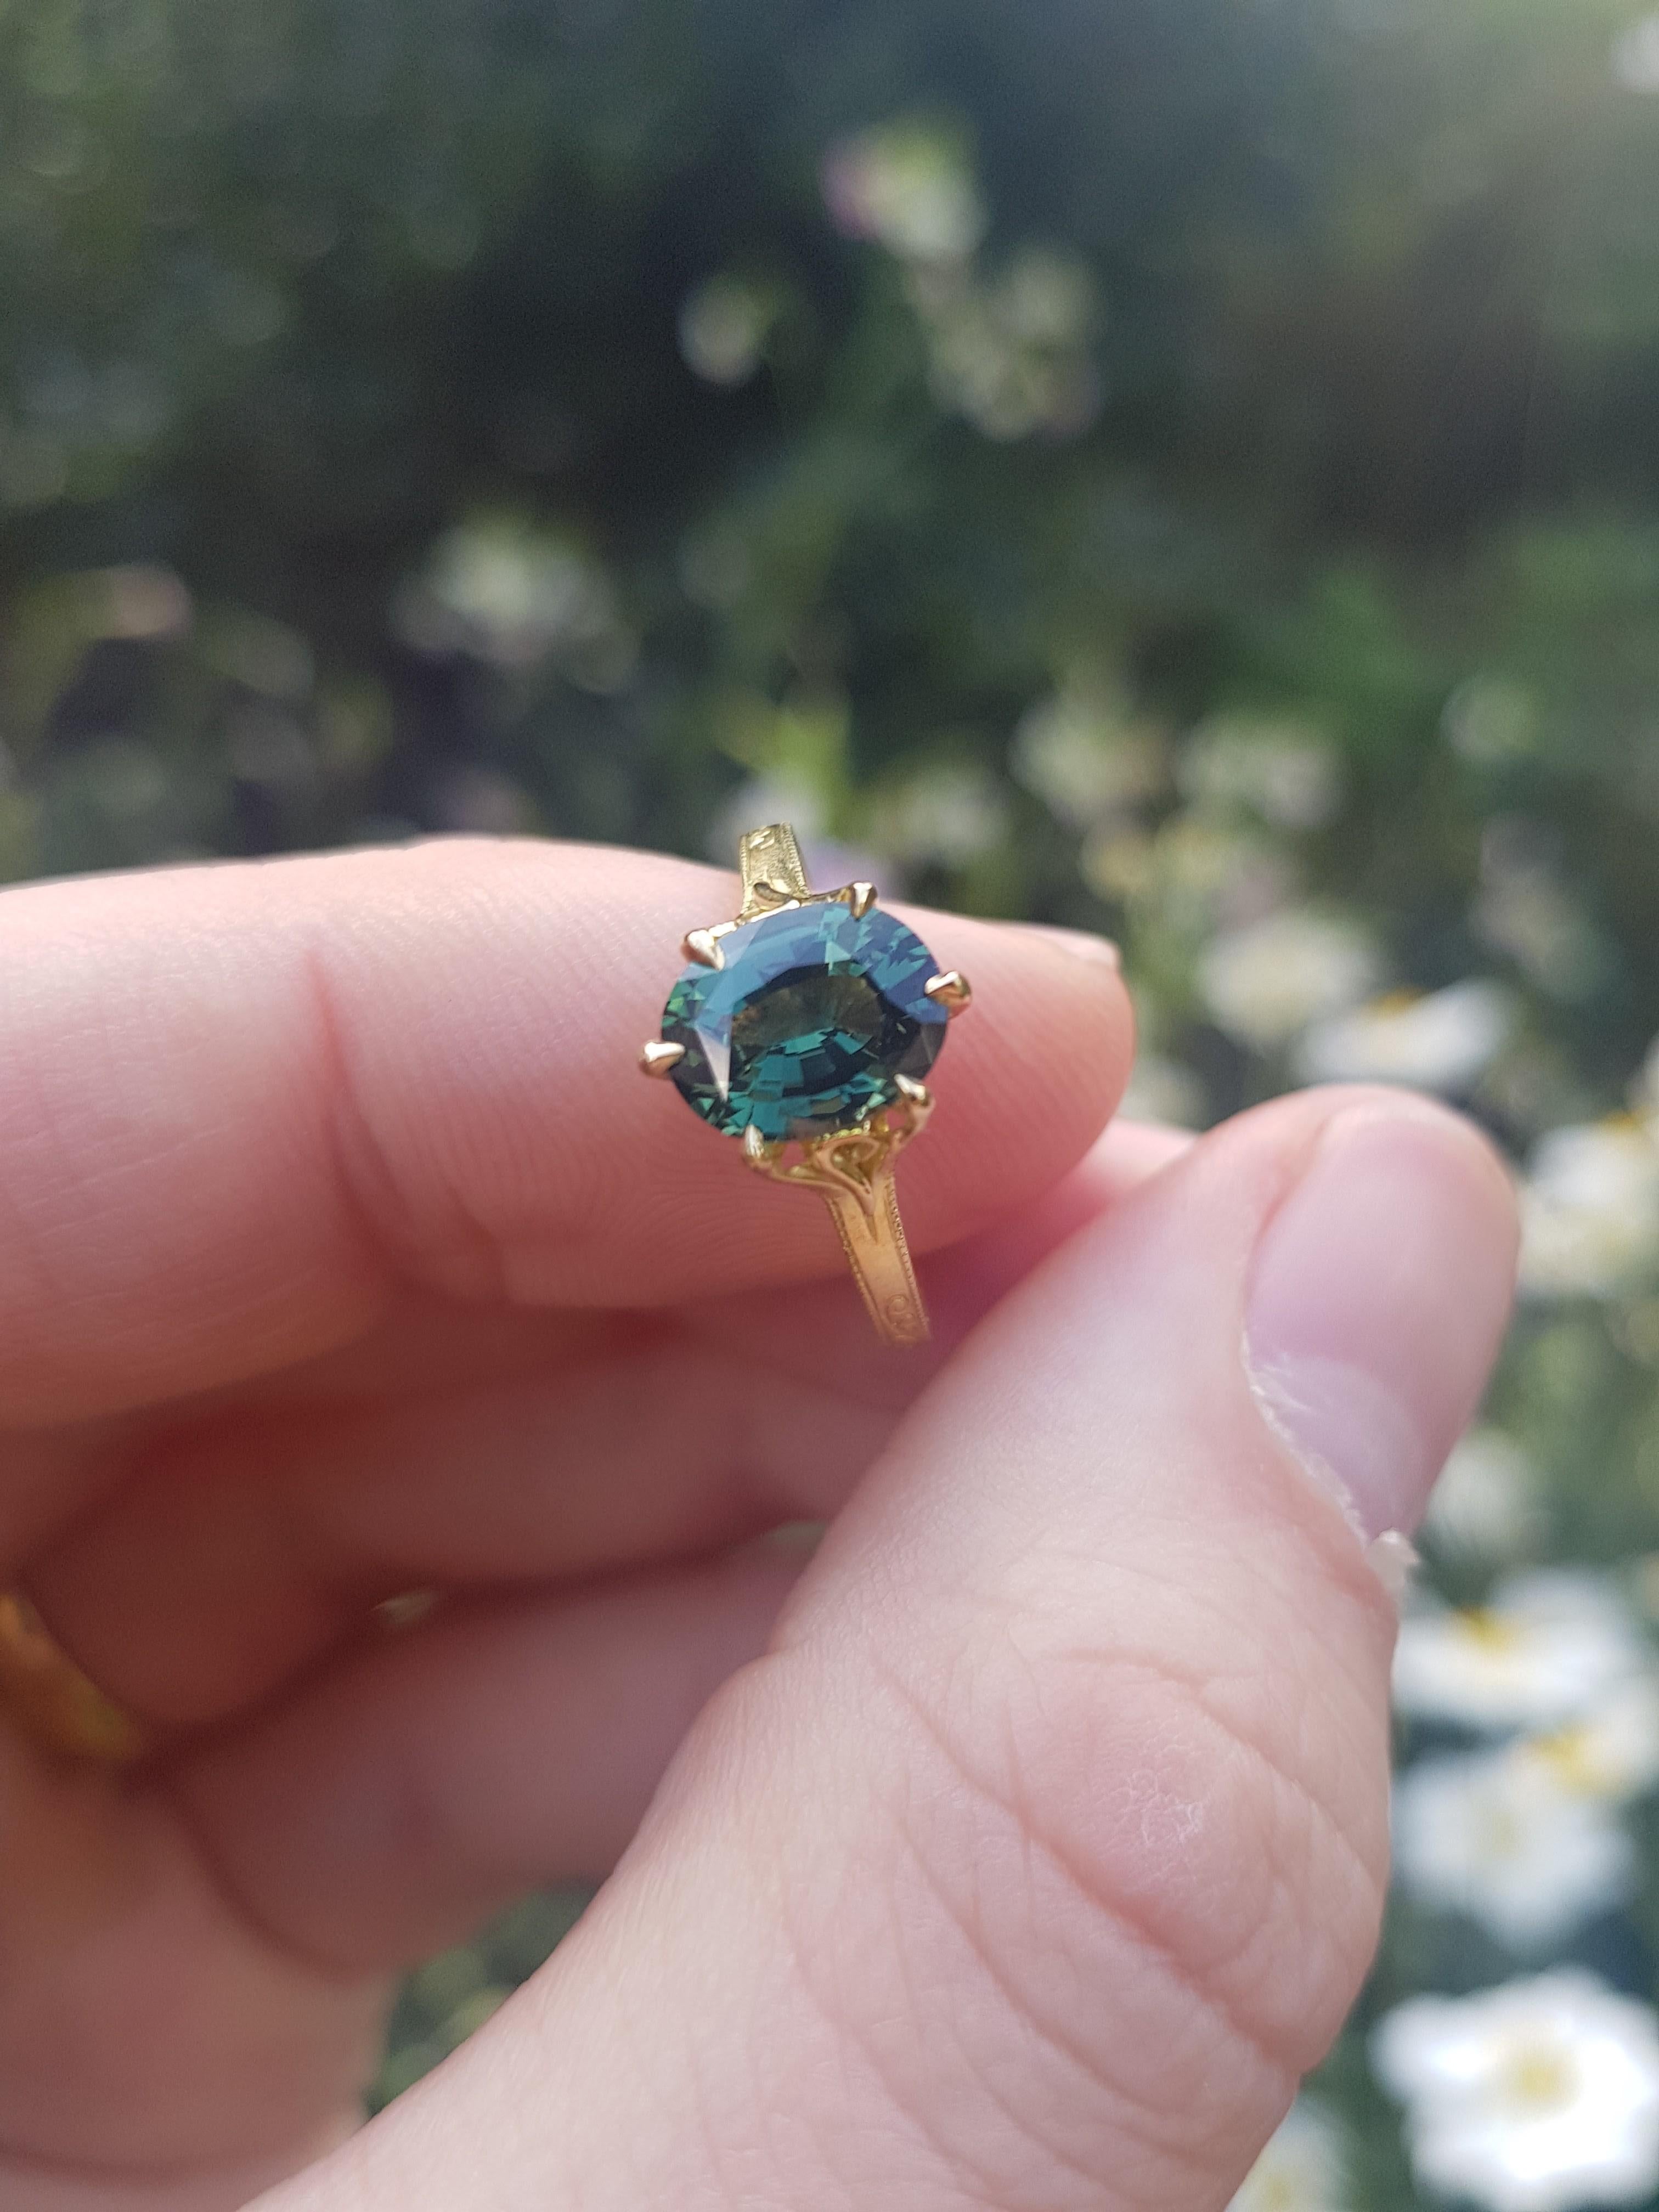 Set in intricately engraved 18 carat yellow gold, this is an unusual 2.12 carat green sapphire in a unique design recently handmade for one of our customers.